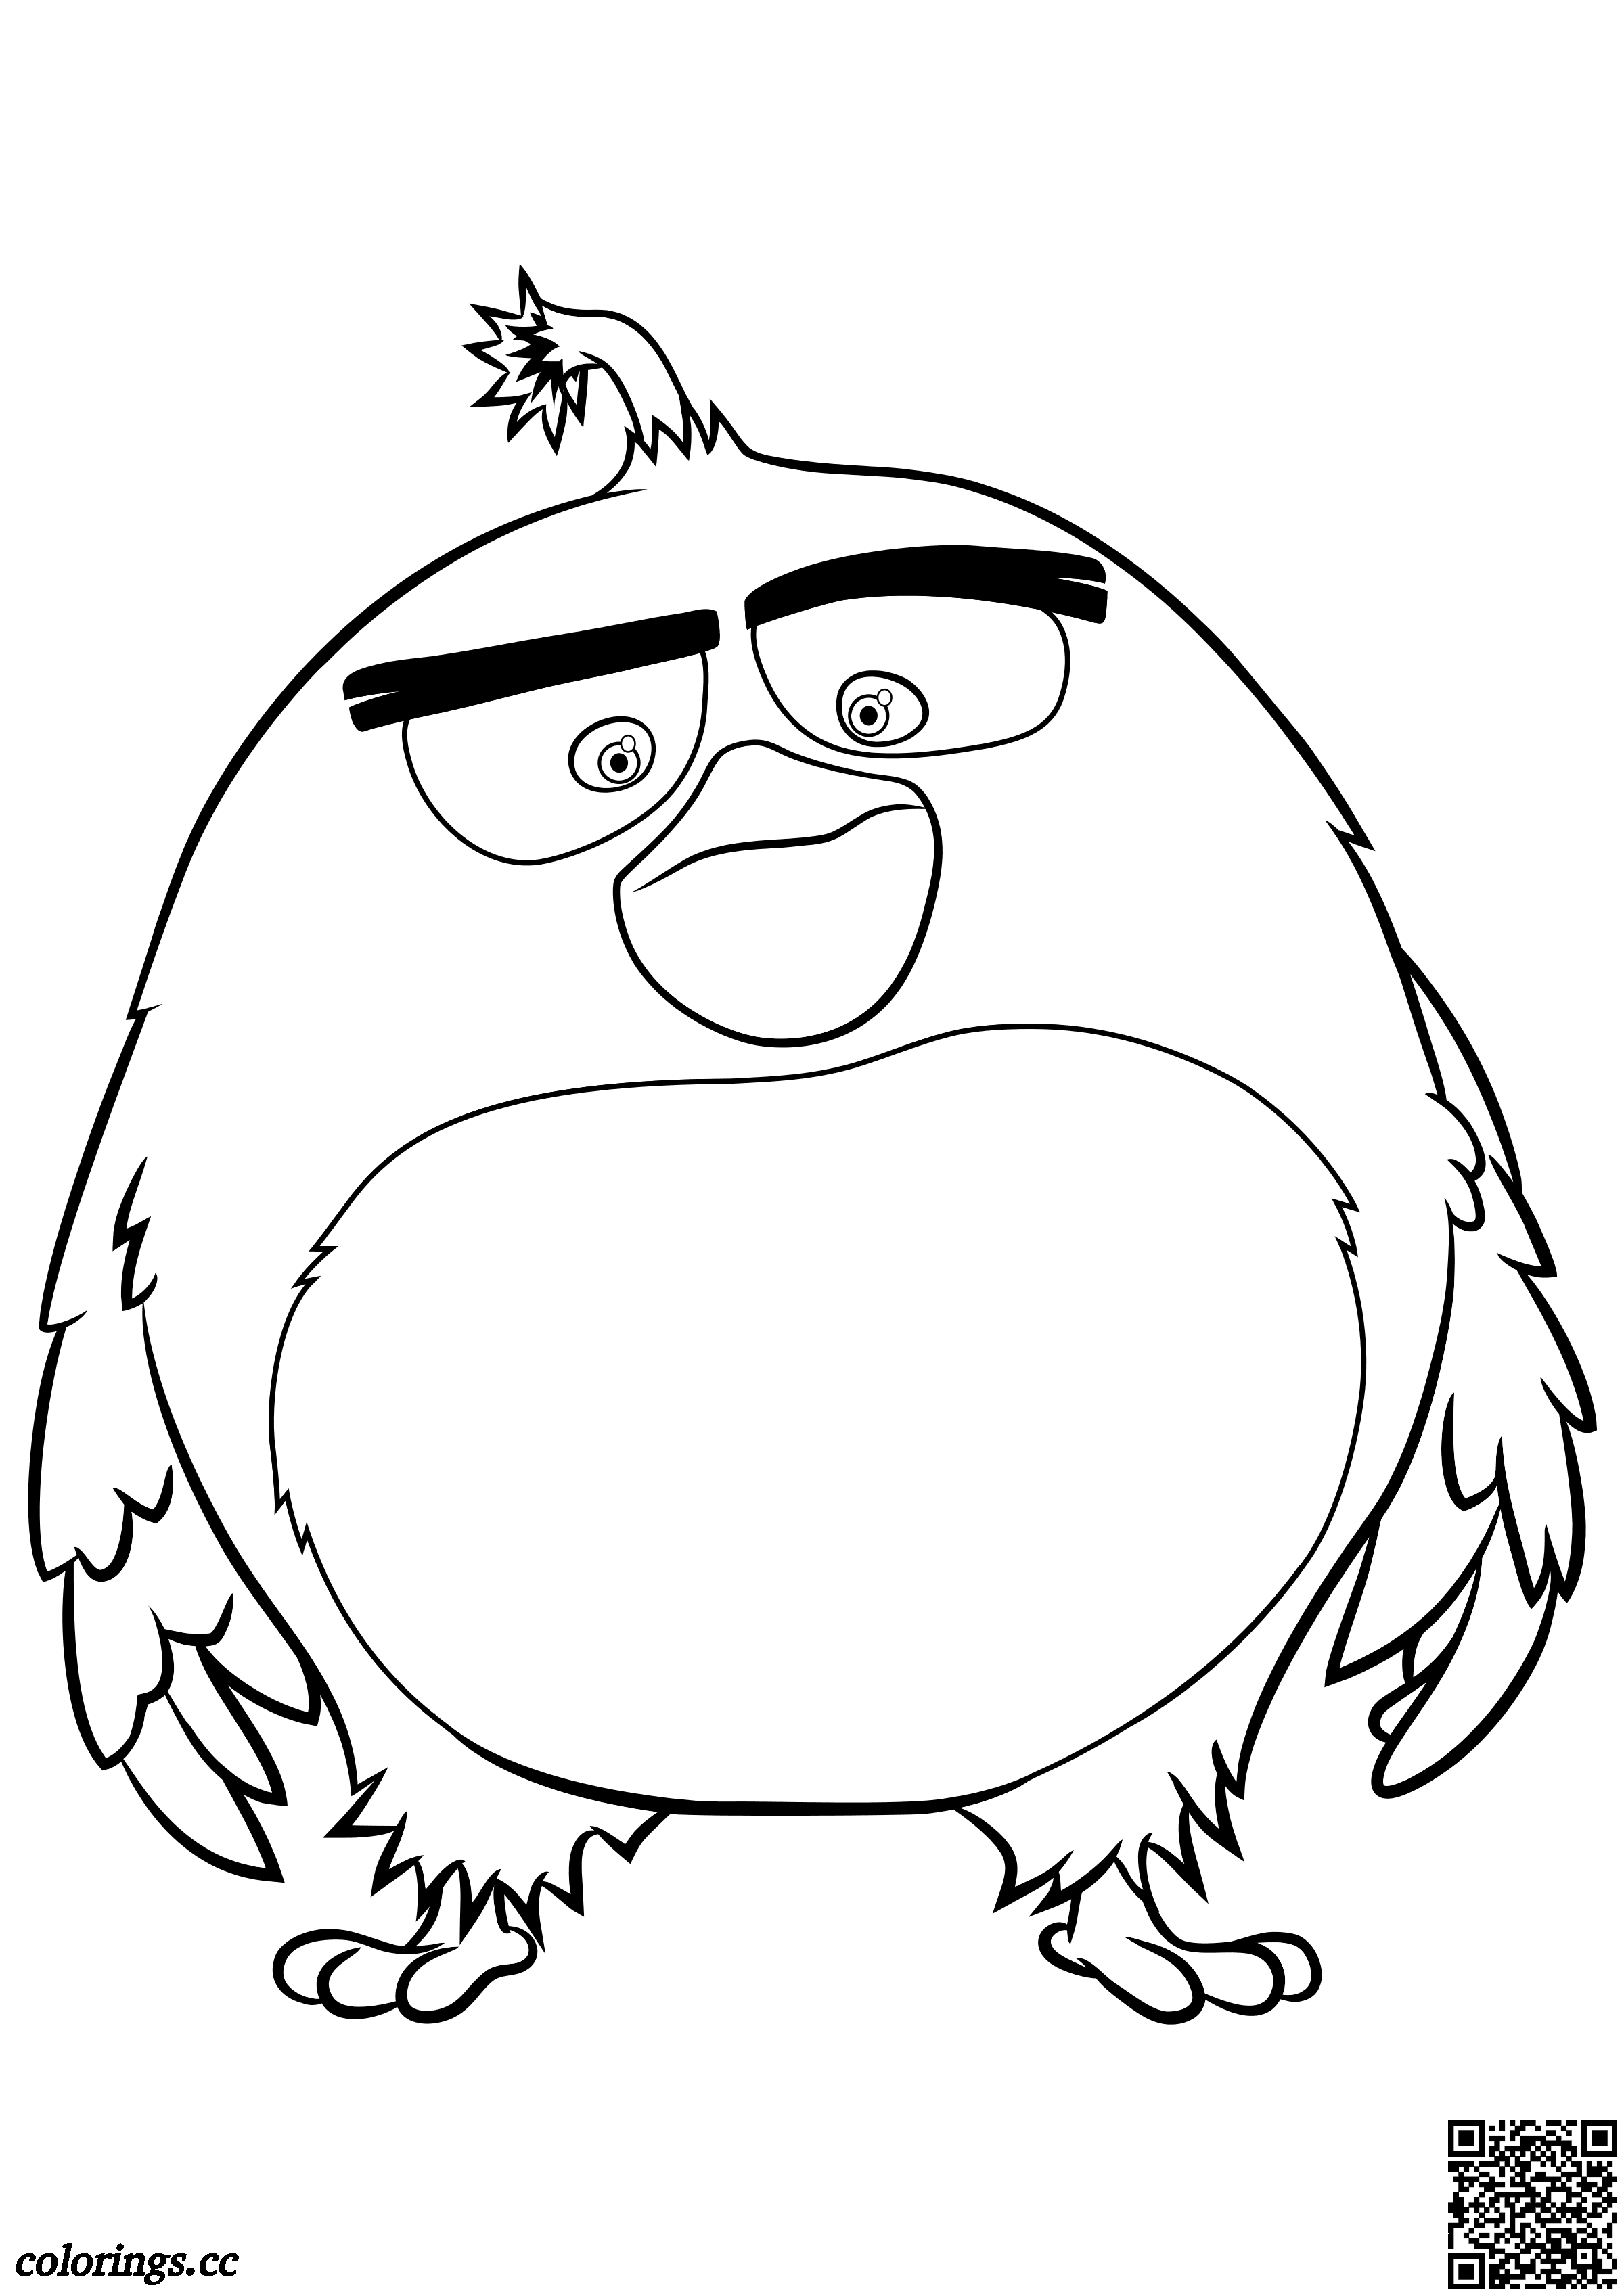 Bomb coloring pages, Angry Birds in the movies coloring pages ...